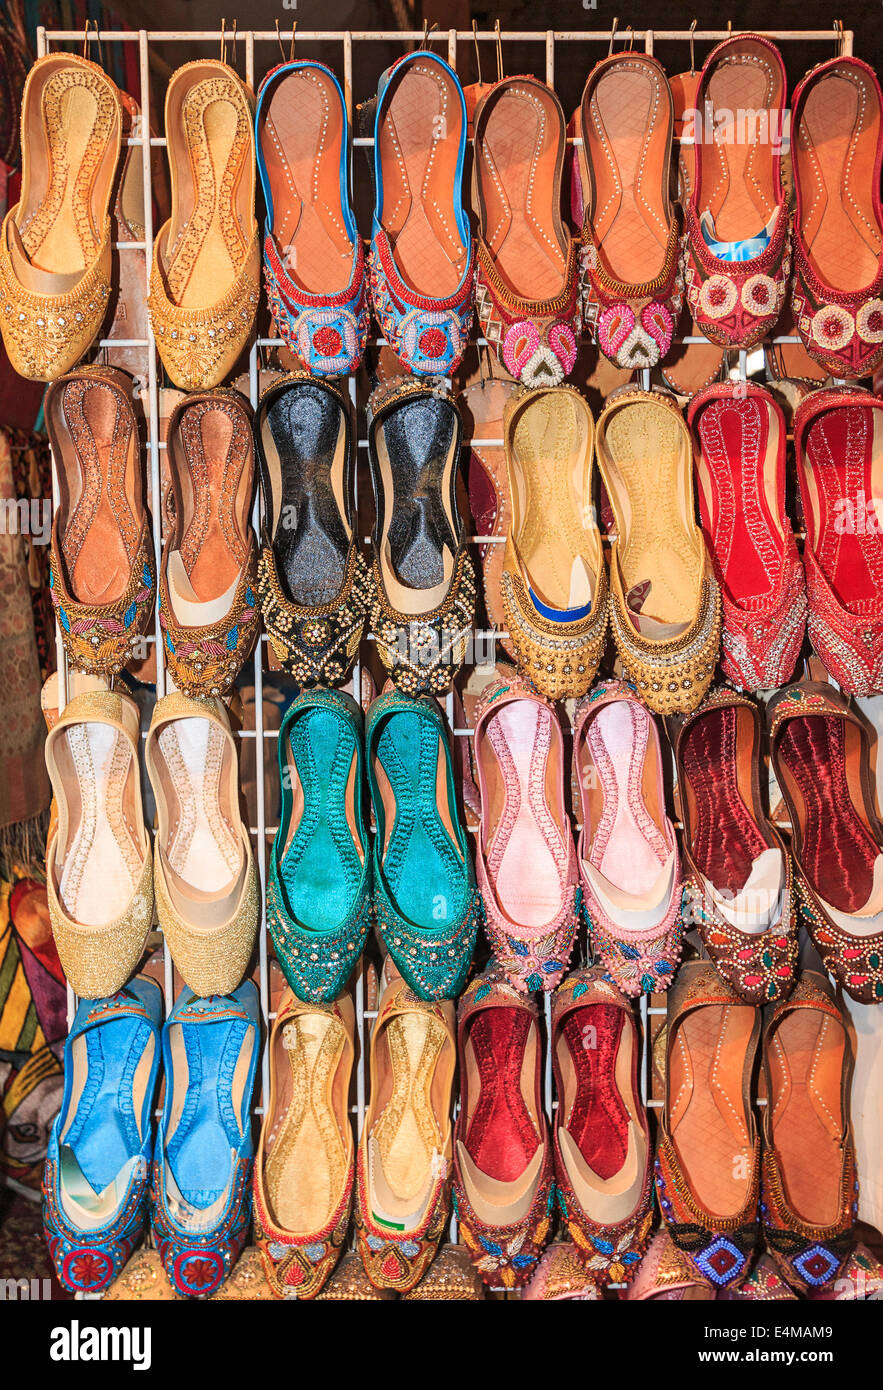 Shoes for sale in the old market (souks) of Dubai, UAE. Stock Photo